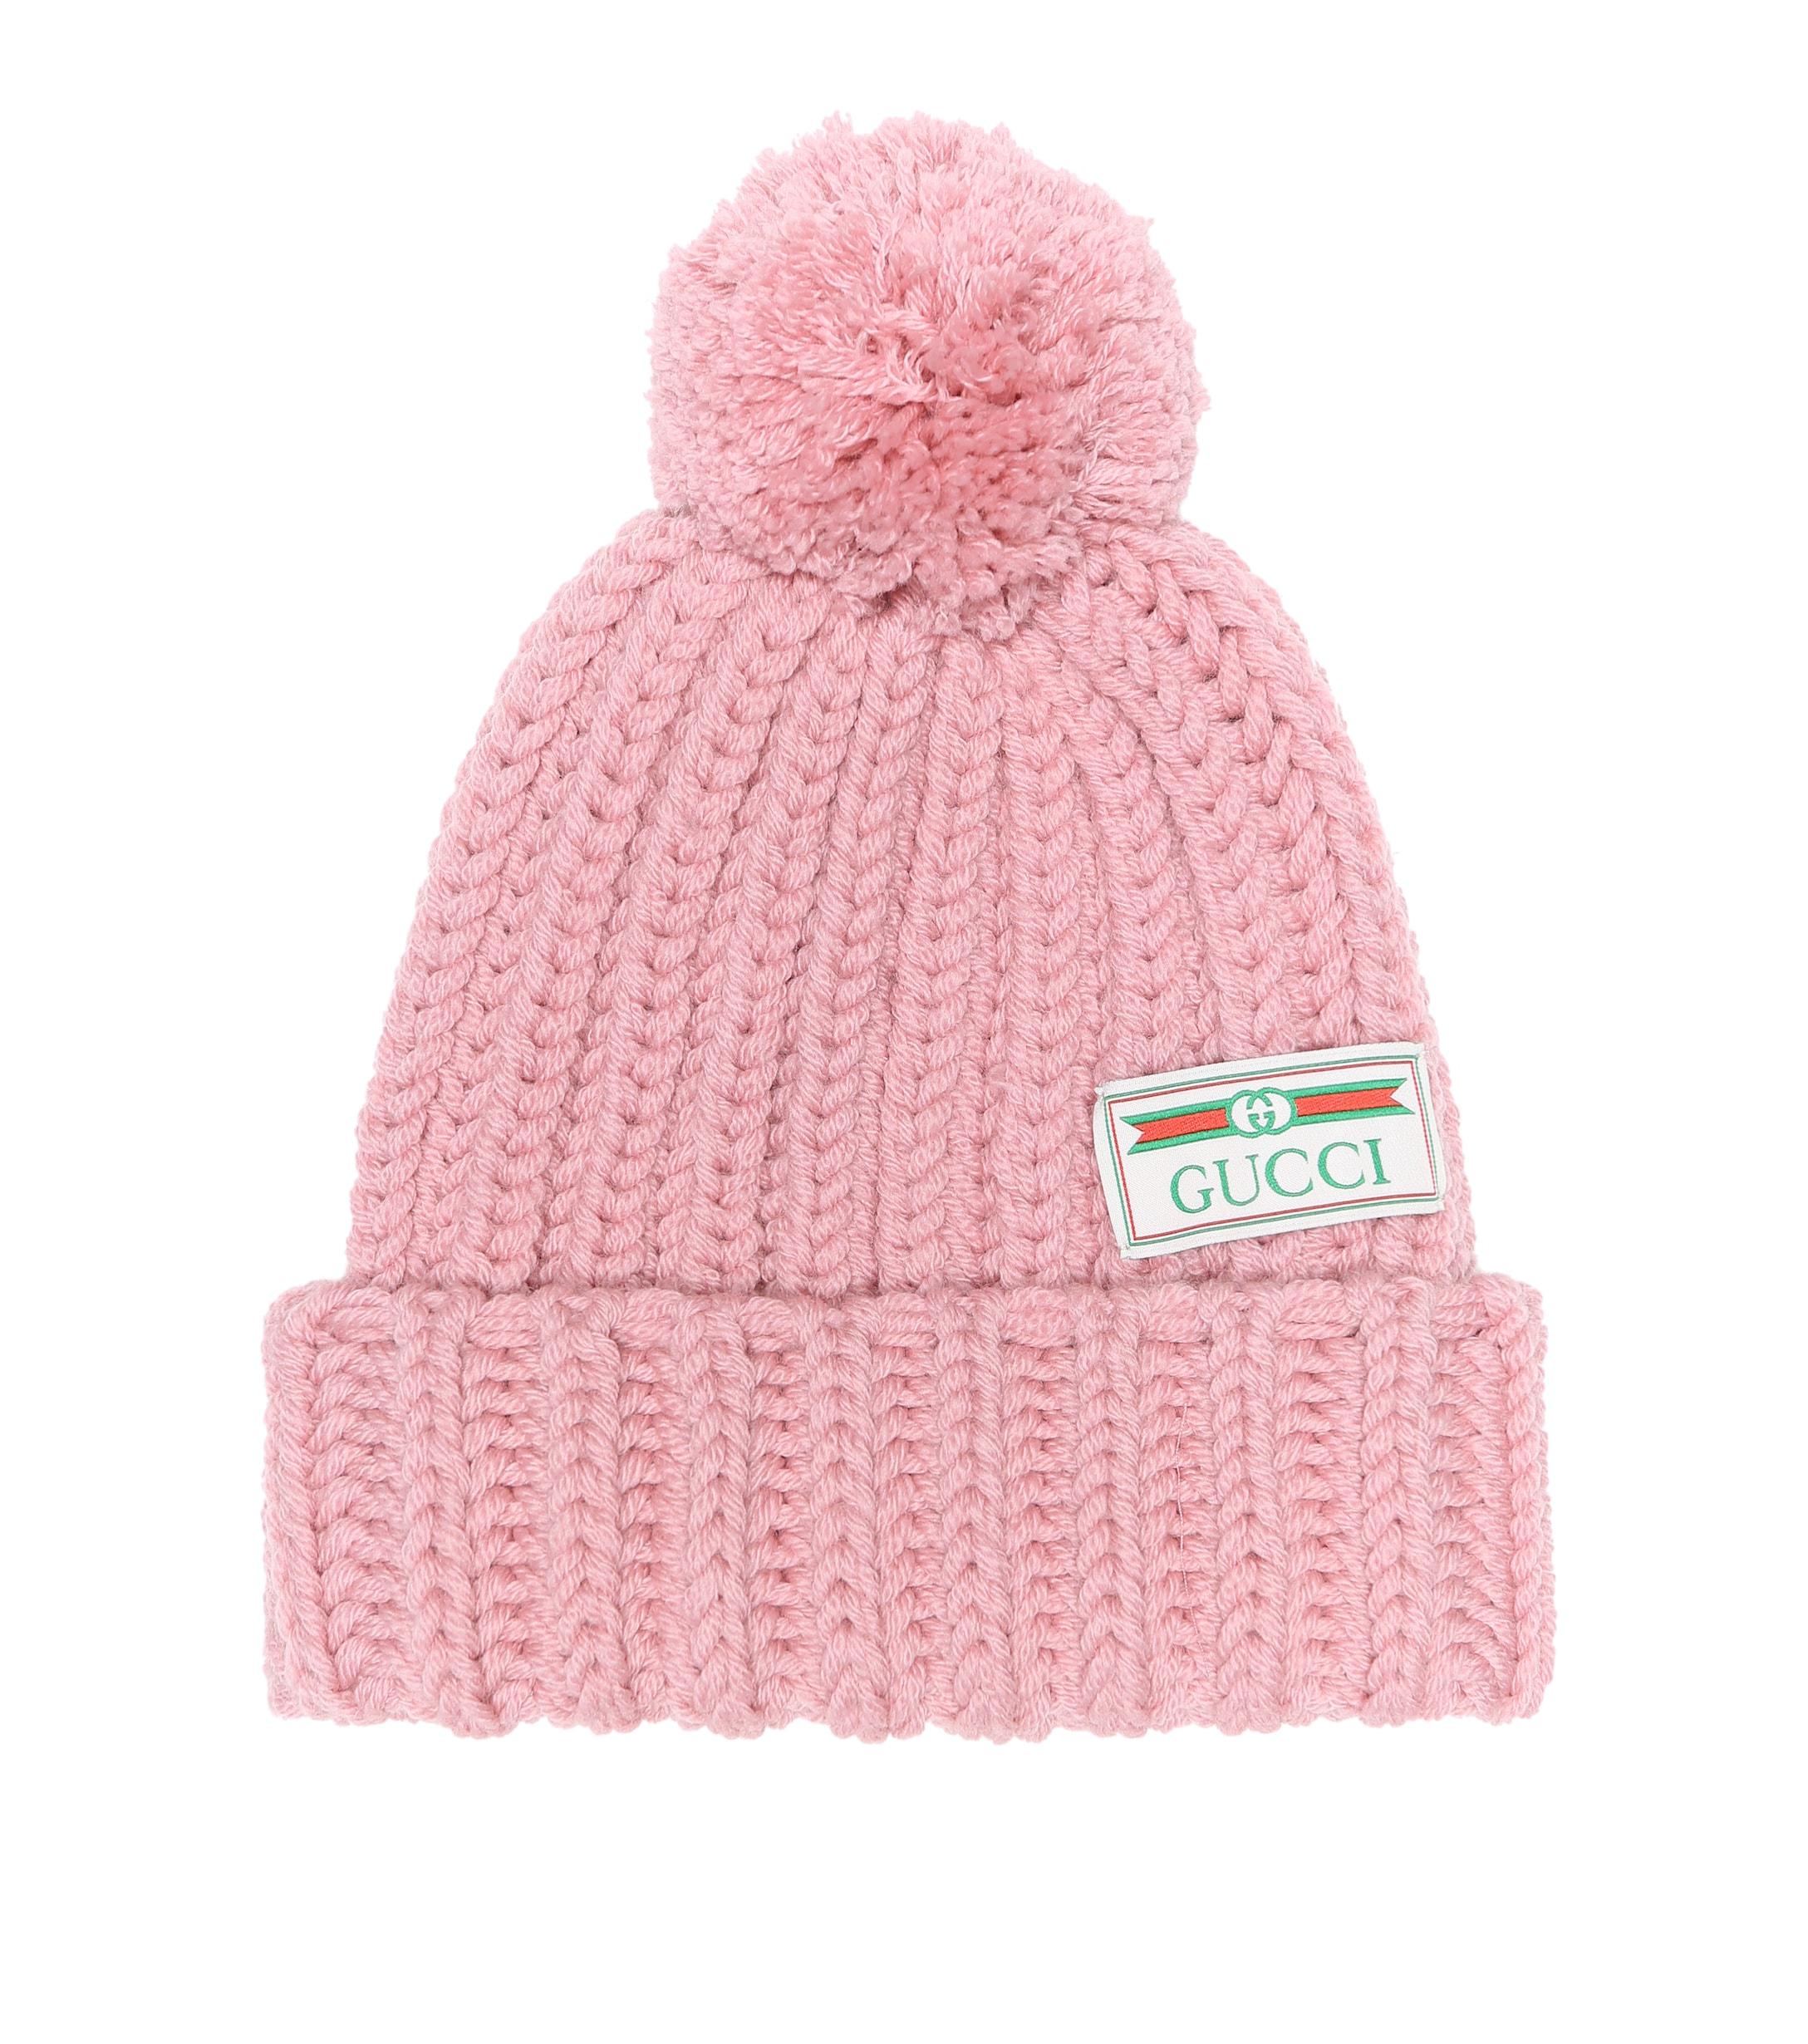 Gucci Wool-knit Pom-pom Beanie Hat in Baby Pink (Pink) - Save 51% - Lyst